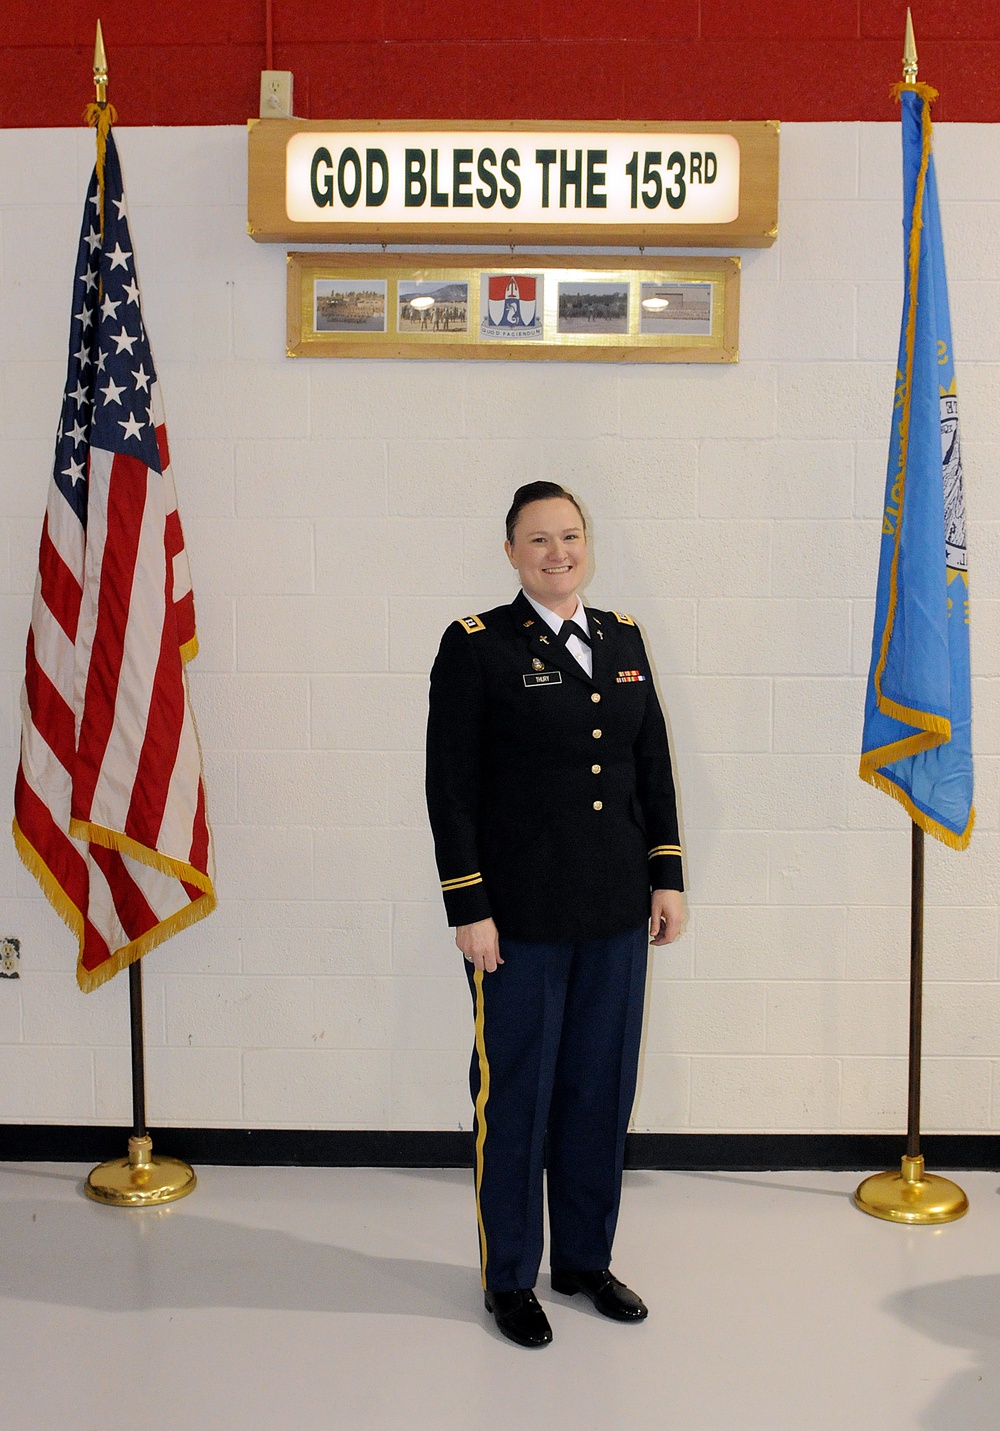 SD National Guard promotes, welcomes its first woman into Chaplain Corps